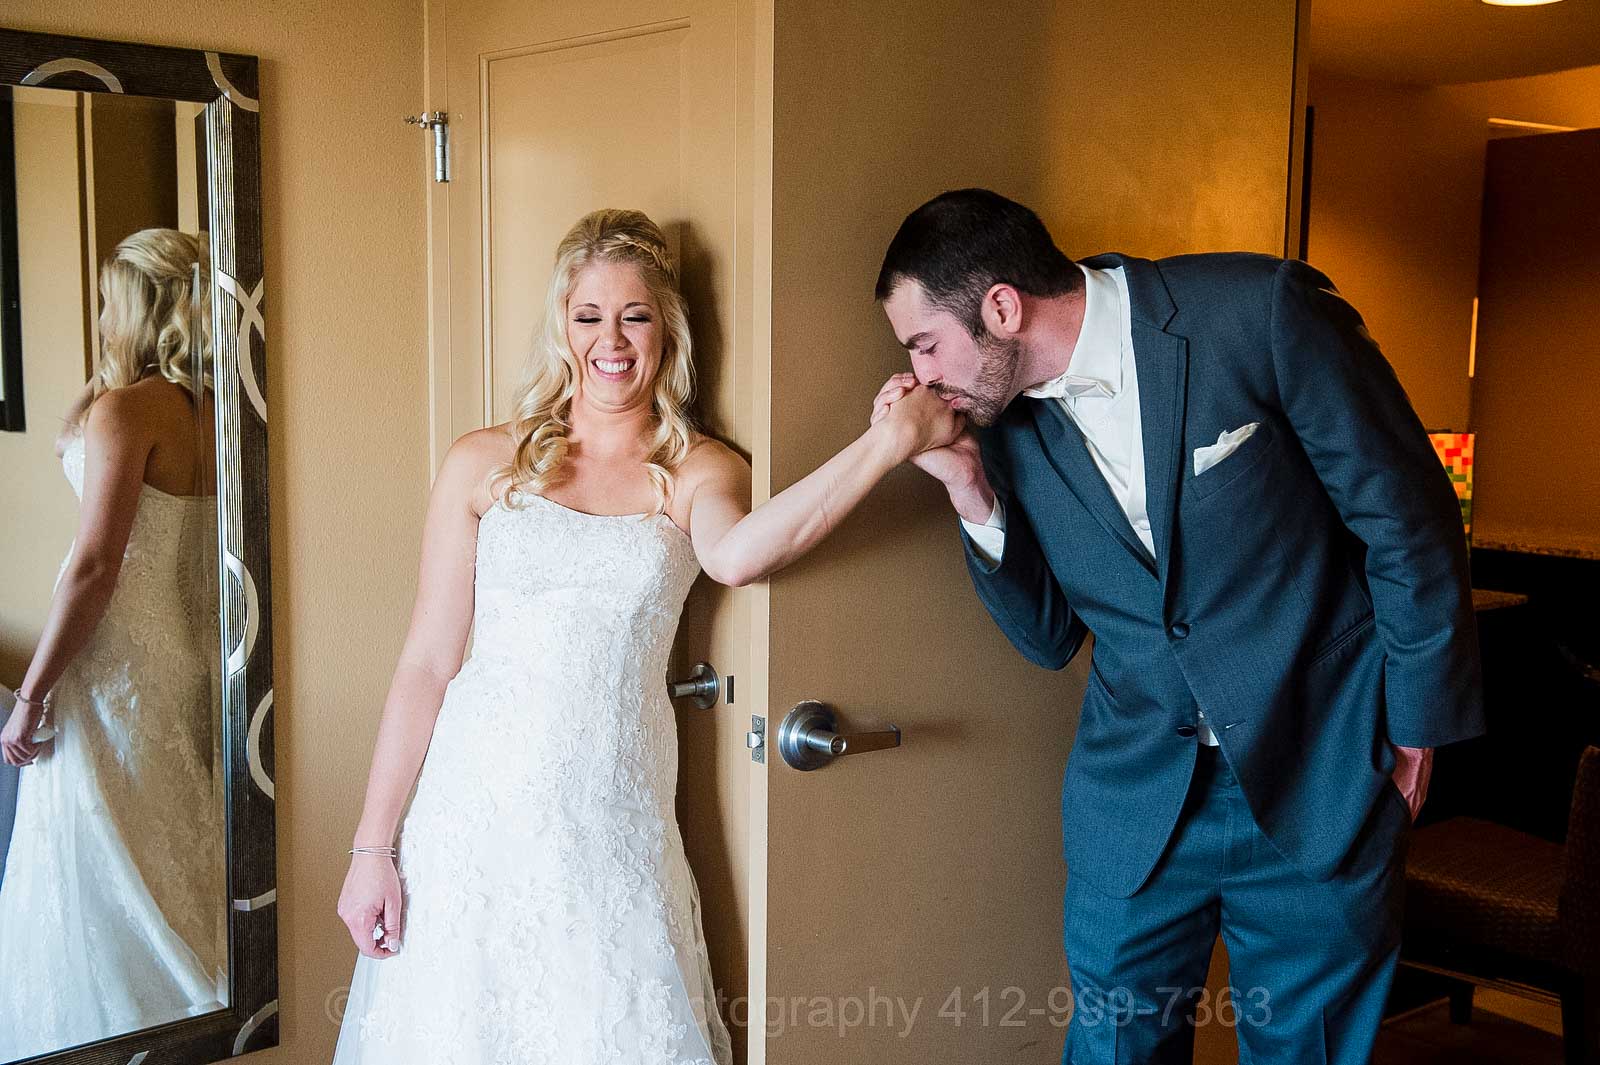 A bride smiles as her groom kisses her hand from around the corner of a door before their wedding at the Embassy Suites near Pittsburgh International Airport.